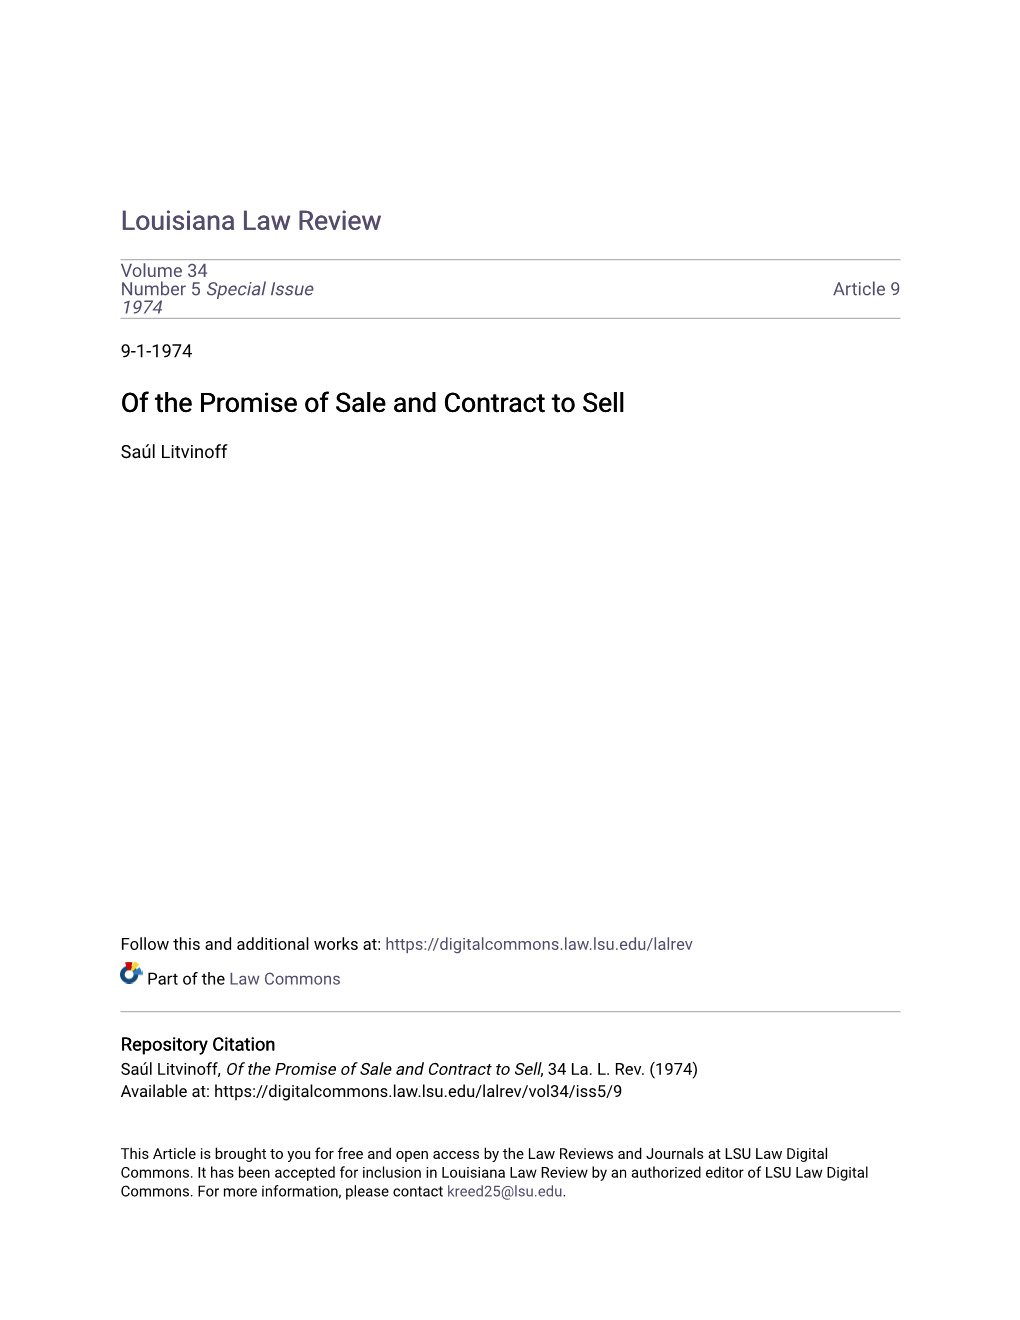 Of the Promise of Sale and Contract to Sell